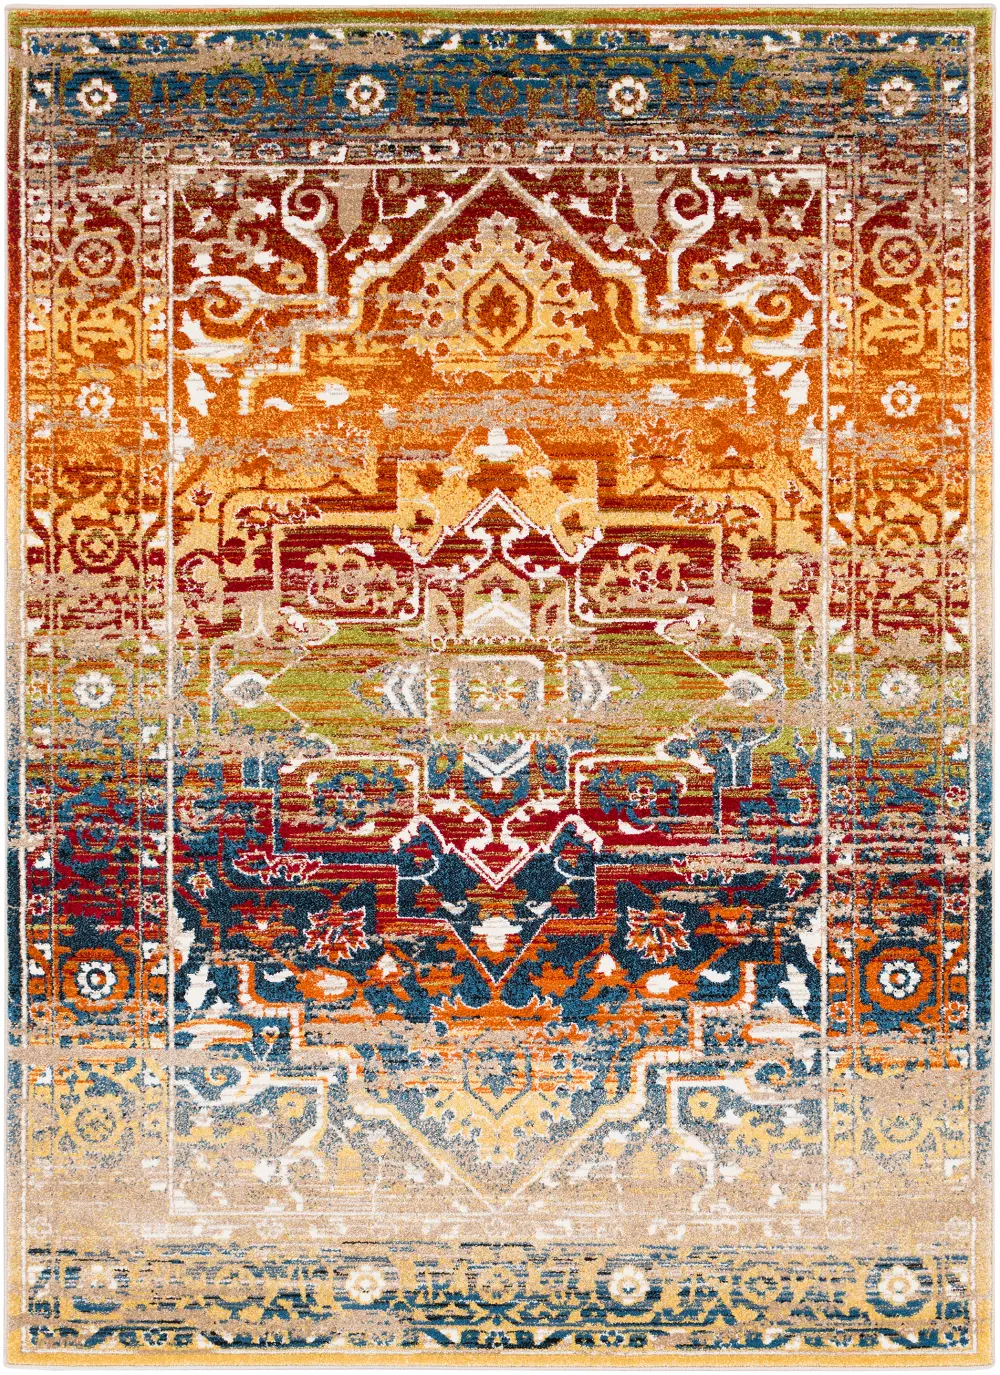 2 x 3 X-Small Traditional Red and Orange Area Rug - Serapi-1